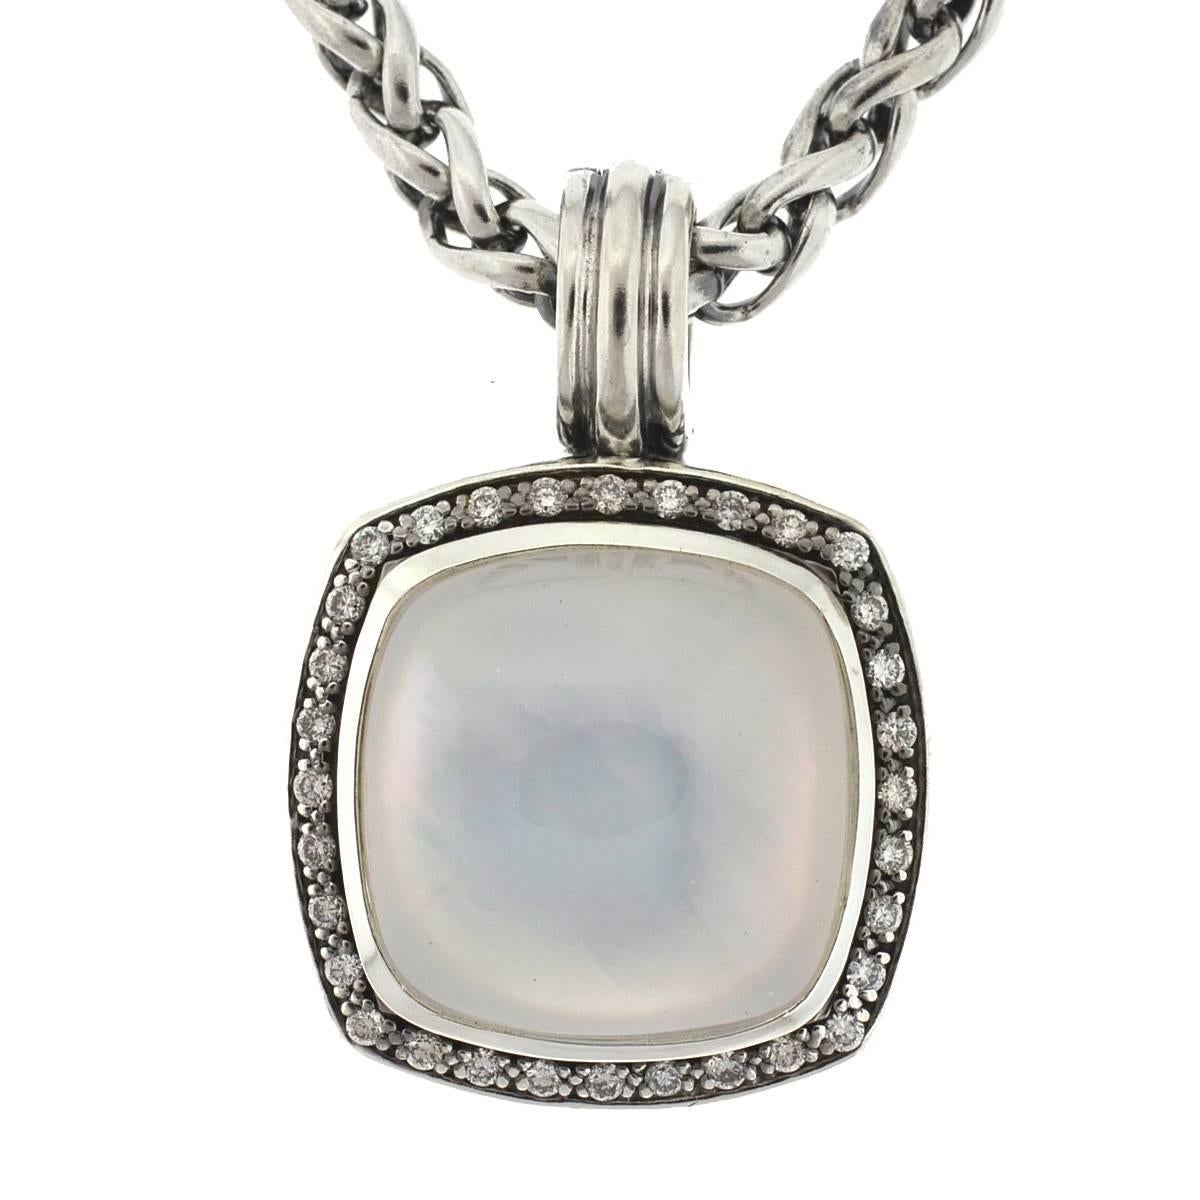 Company - David Yurman
Style - Albion
Metal - Sterling Silver 925
Stones - Moonstone 17mm and Diamonds
Length on the Chain - 18